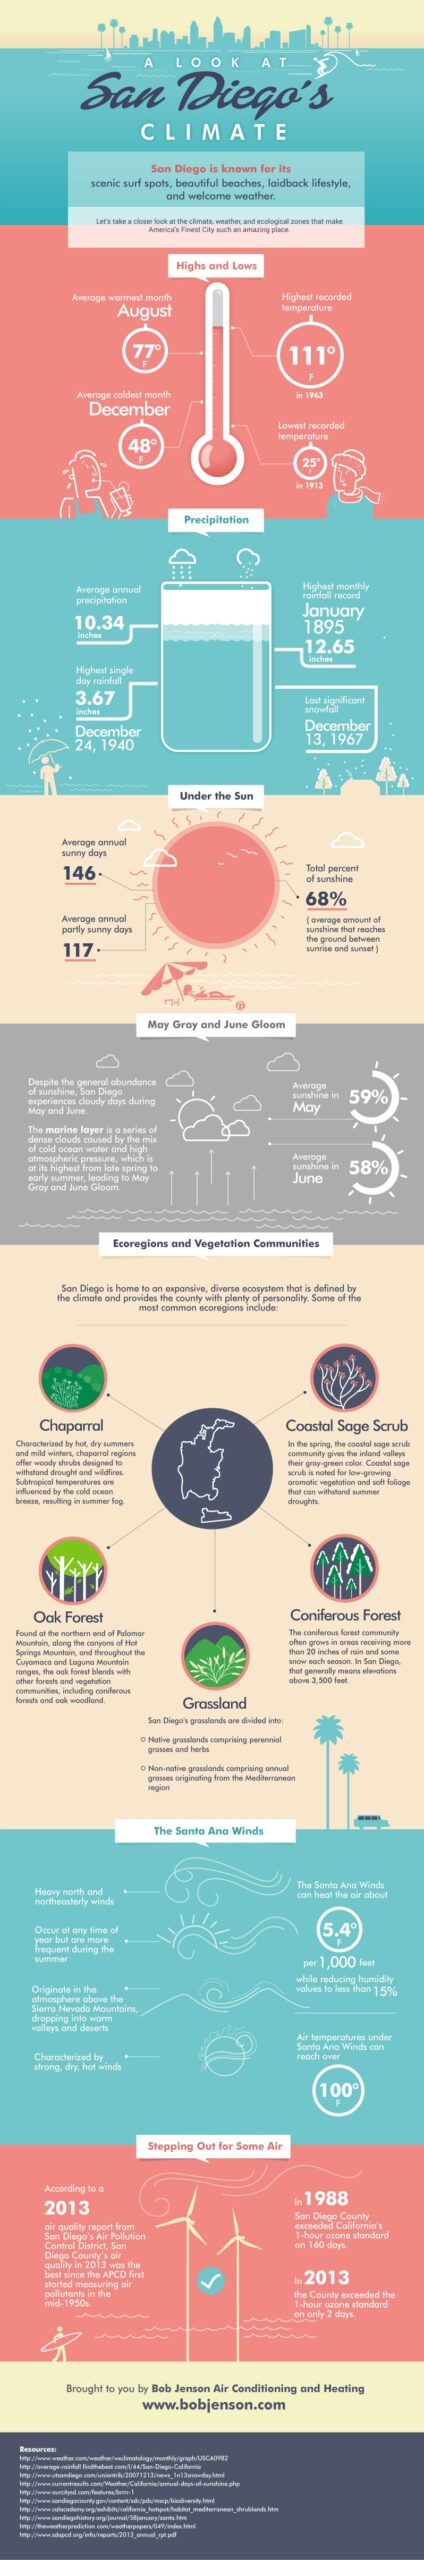 An infographic looking in depth at San Diego's climate and ecological zones